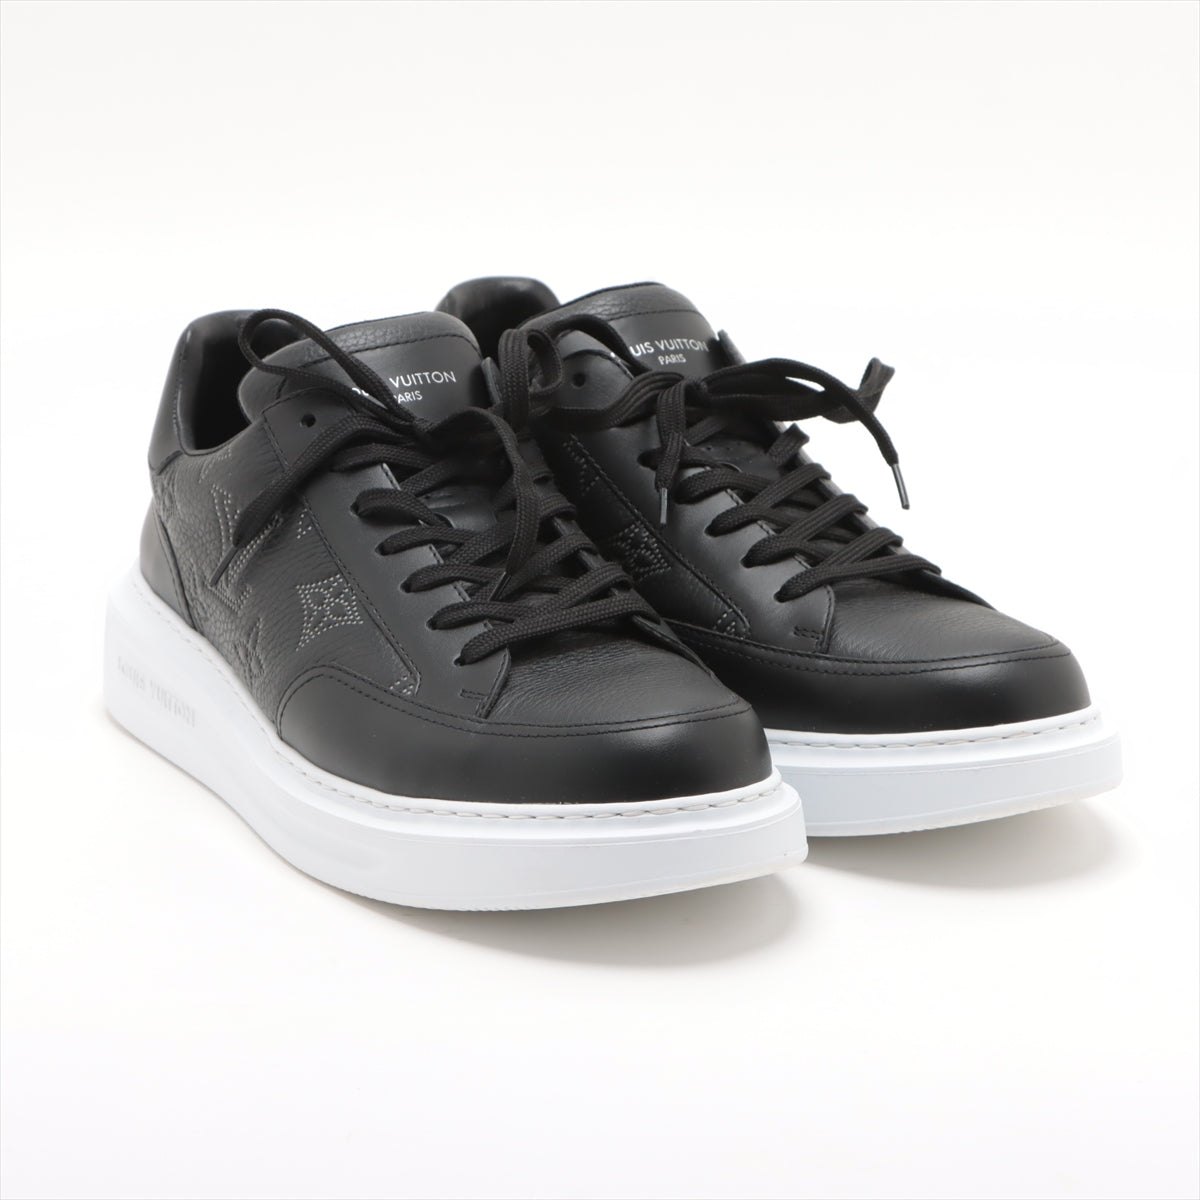 Louis Vuitton Beverly Hills Line 22 years Leather Sneakers 9 1/2 Men's Black DD0272 Monogram